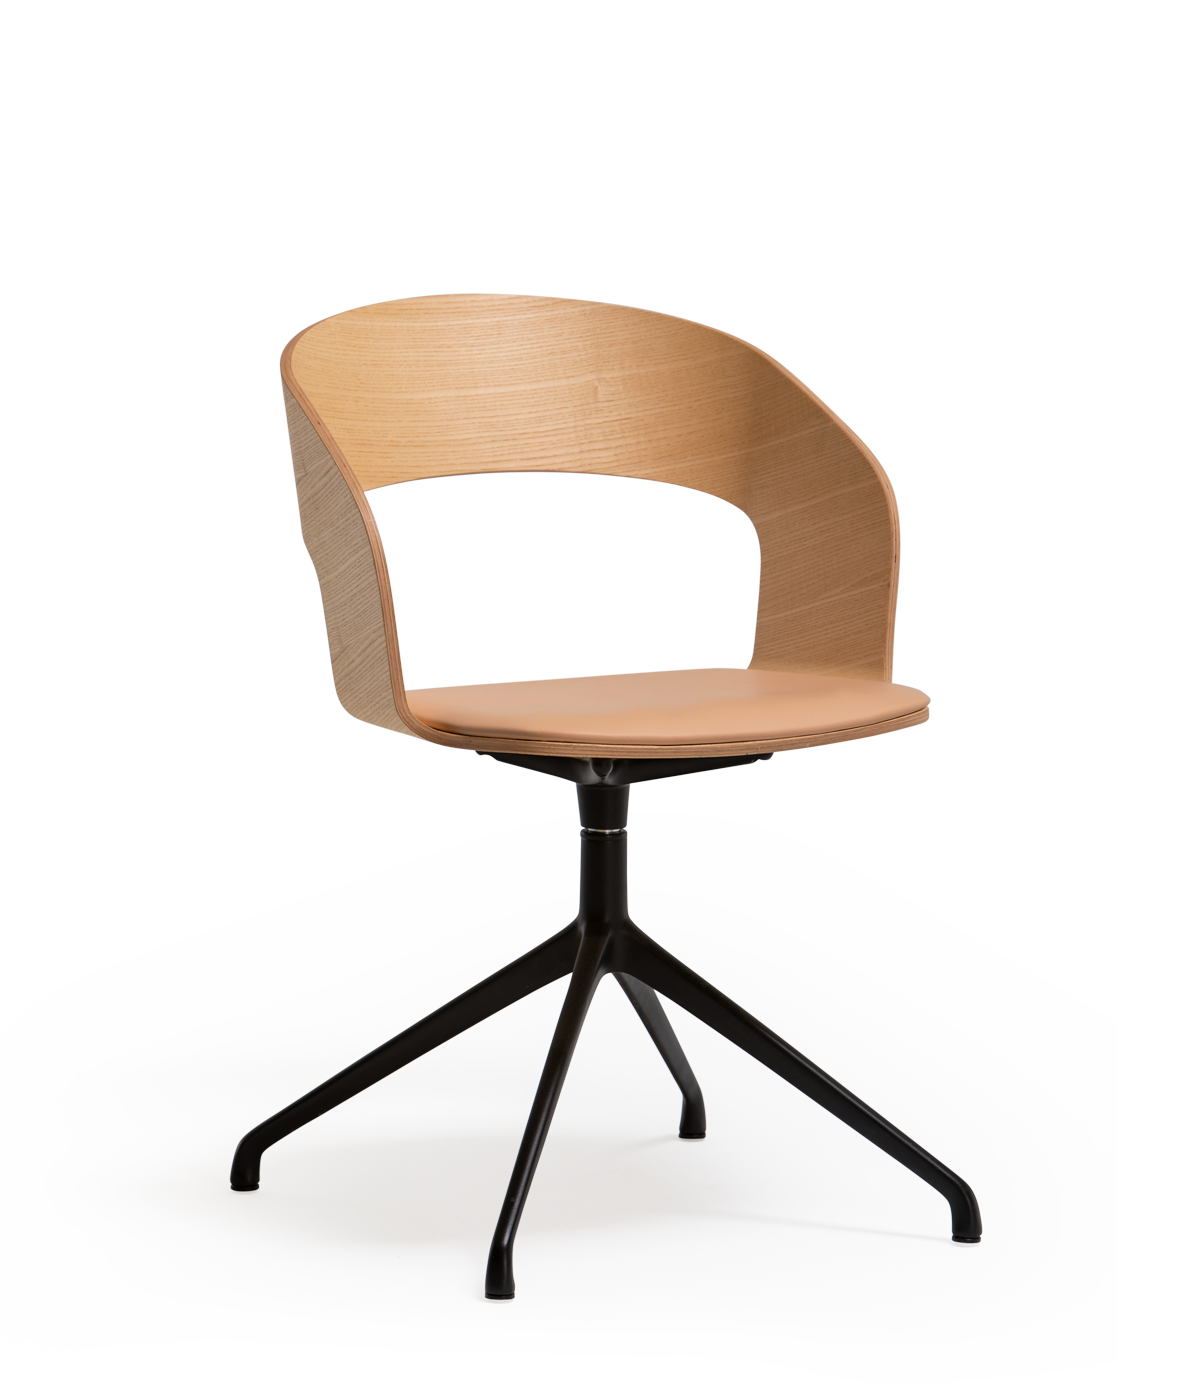 Goose chair Model B with armrests and swivel base with 4 legs - Vergés